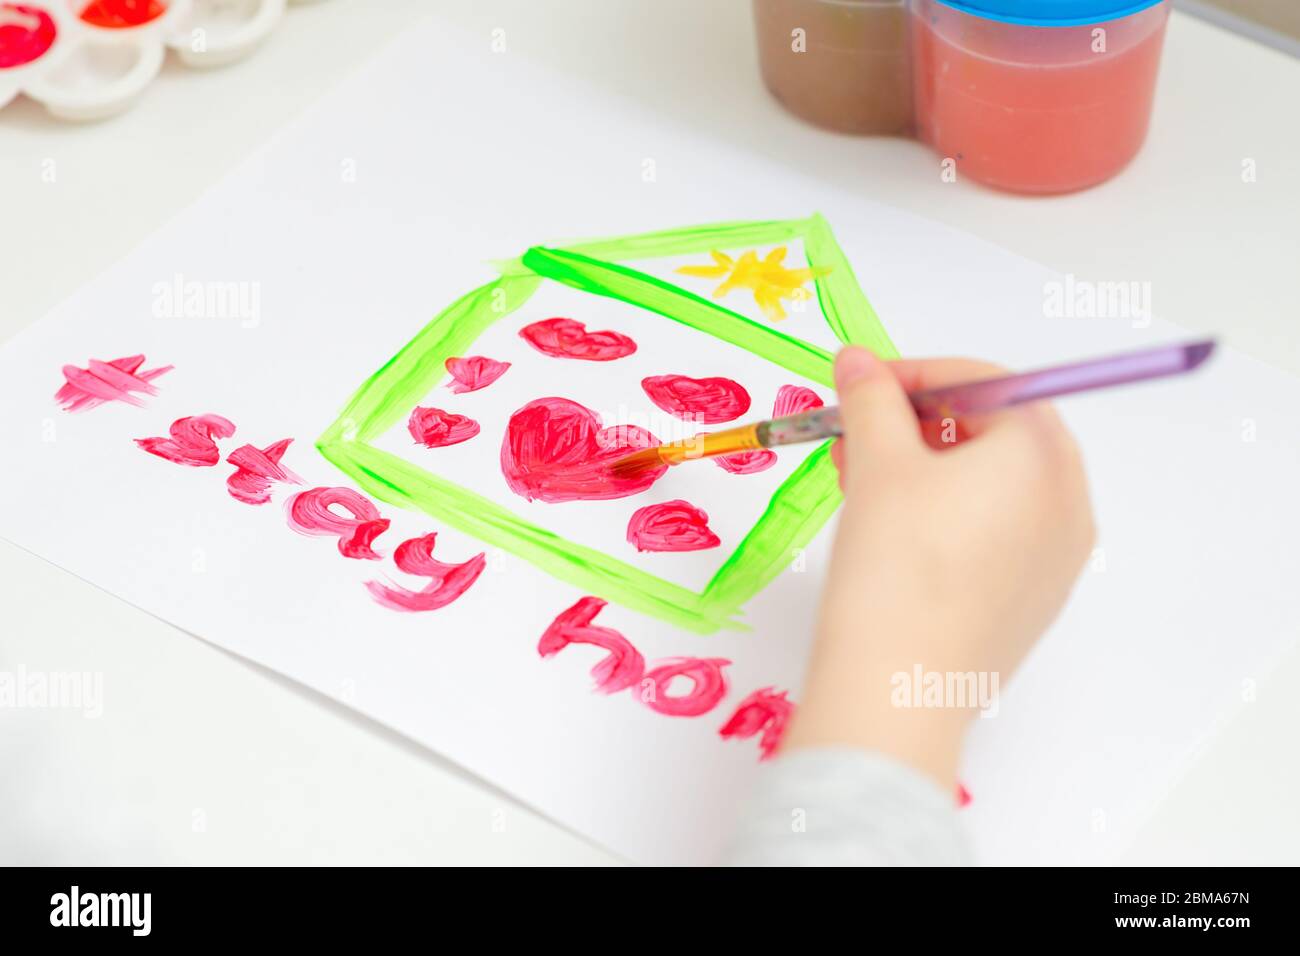 Child is drawing red hearts inside house on white sheet of paper with words Stay Home. Stay Home concept. Children creativity. Stock Photo